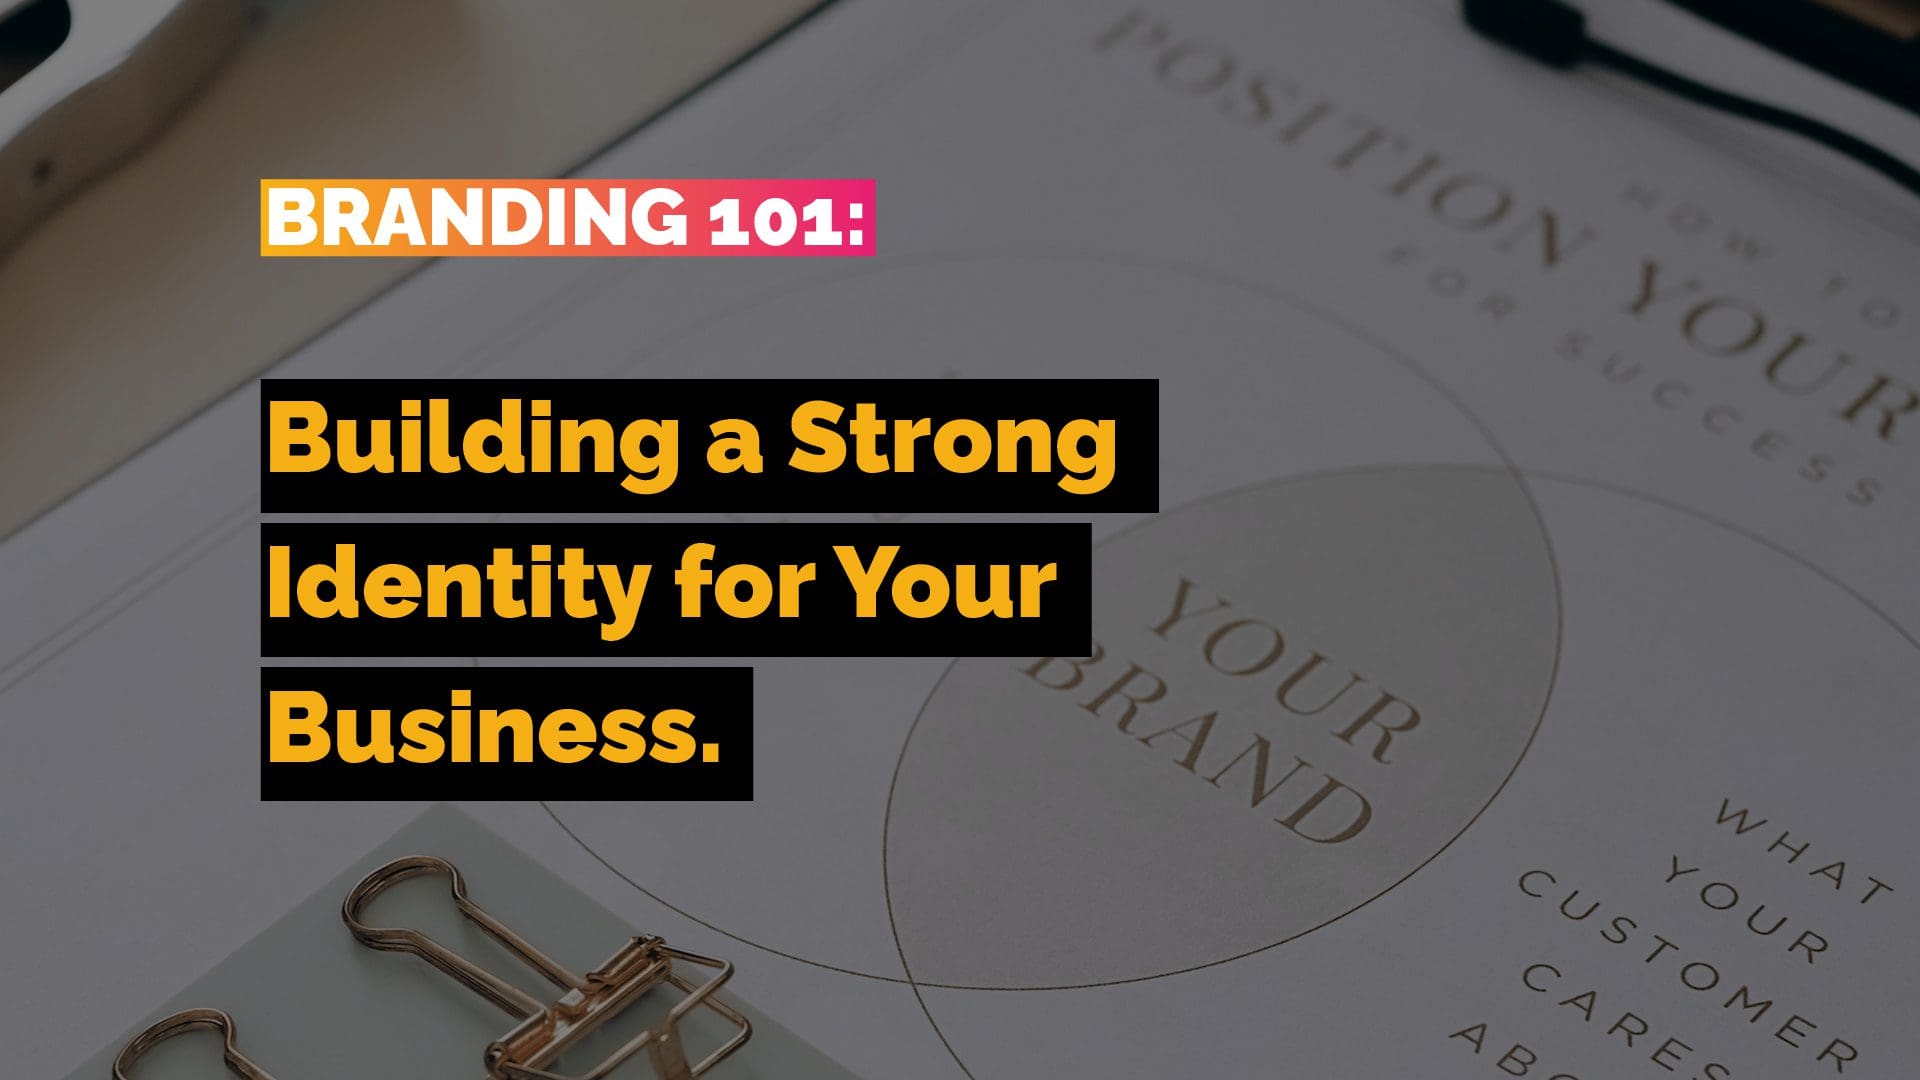 Branding 101: Building a Strong Identity for Your Business